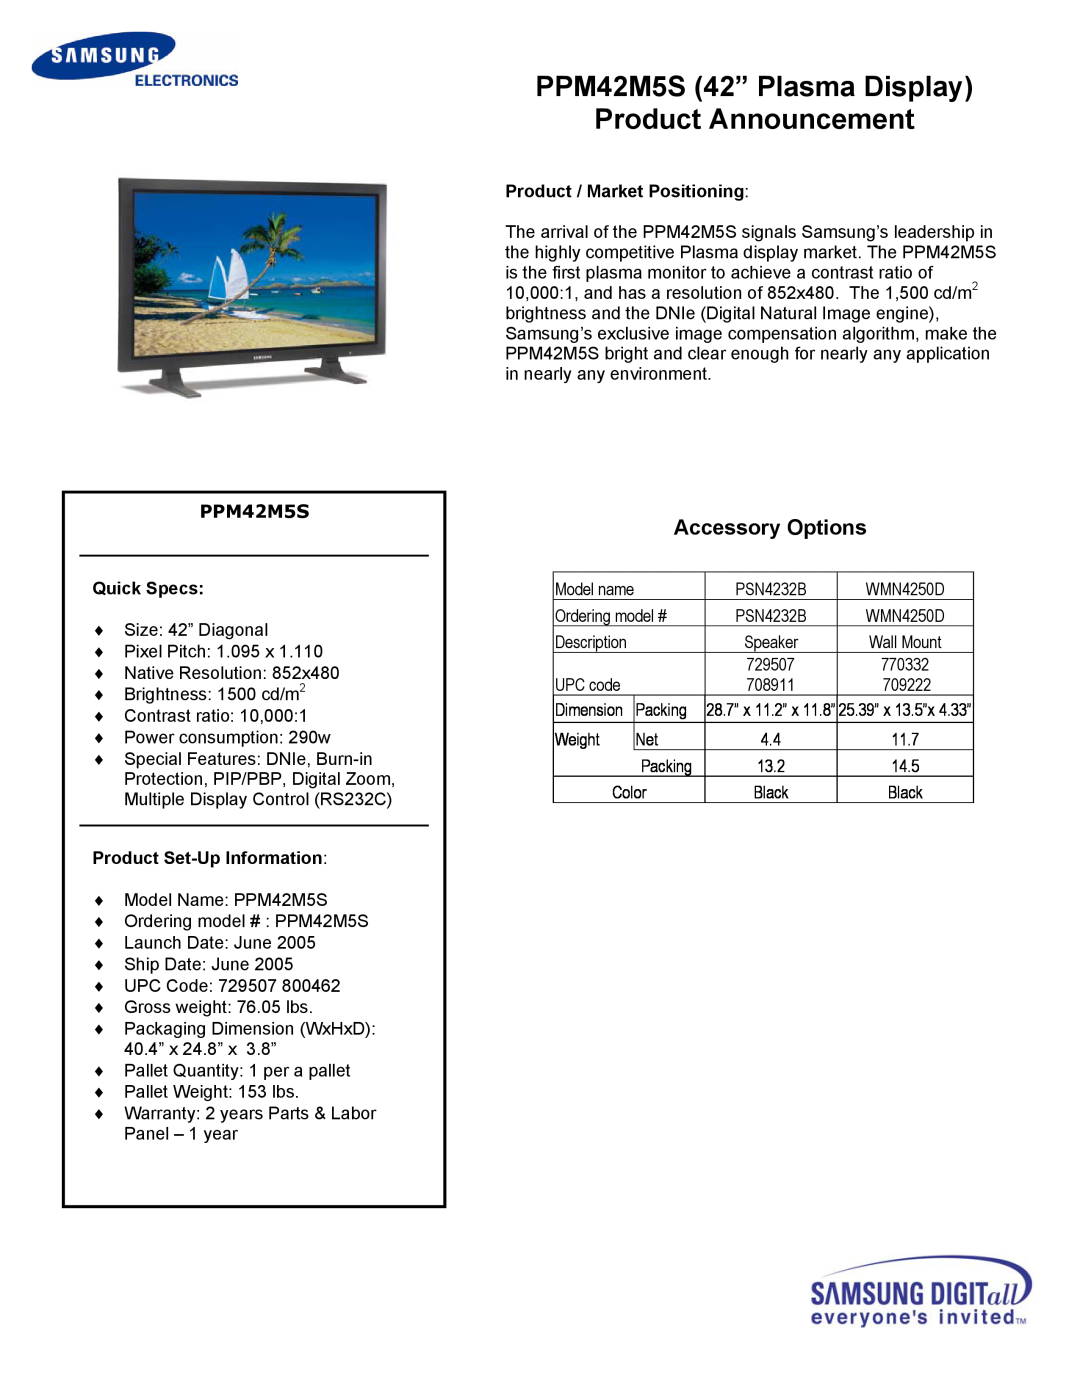 Samsung PPM42M5S 42” Plasma Display Product Announcement, Accessory Options, Quick Specs, Product Set-Up Information 